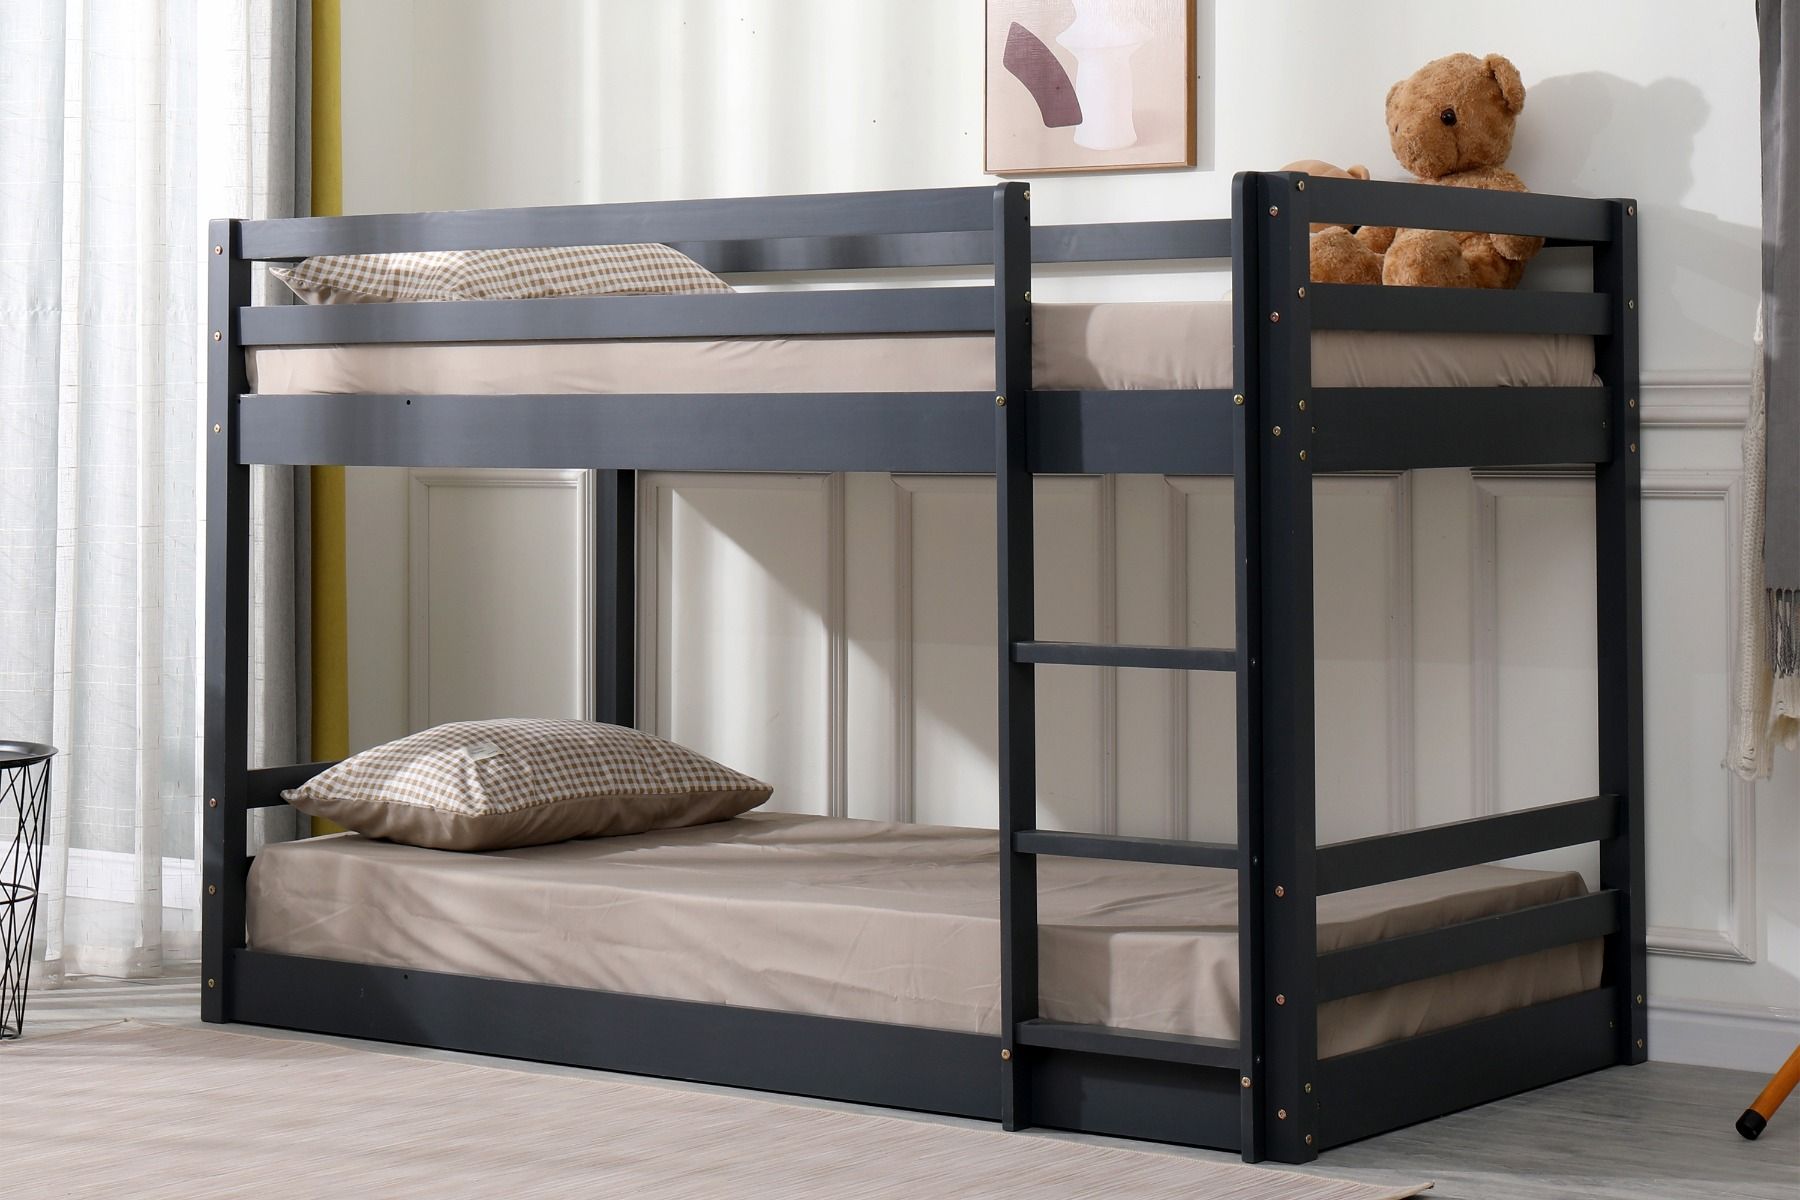 Flair Wooden Spark Low Bunk Bed - Grey